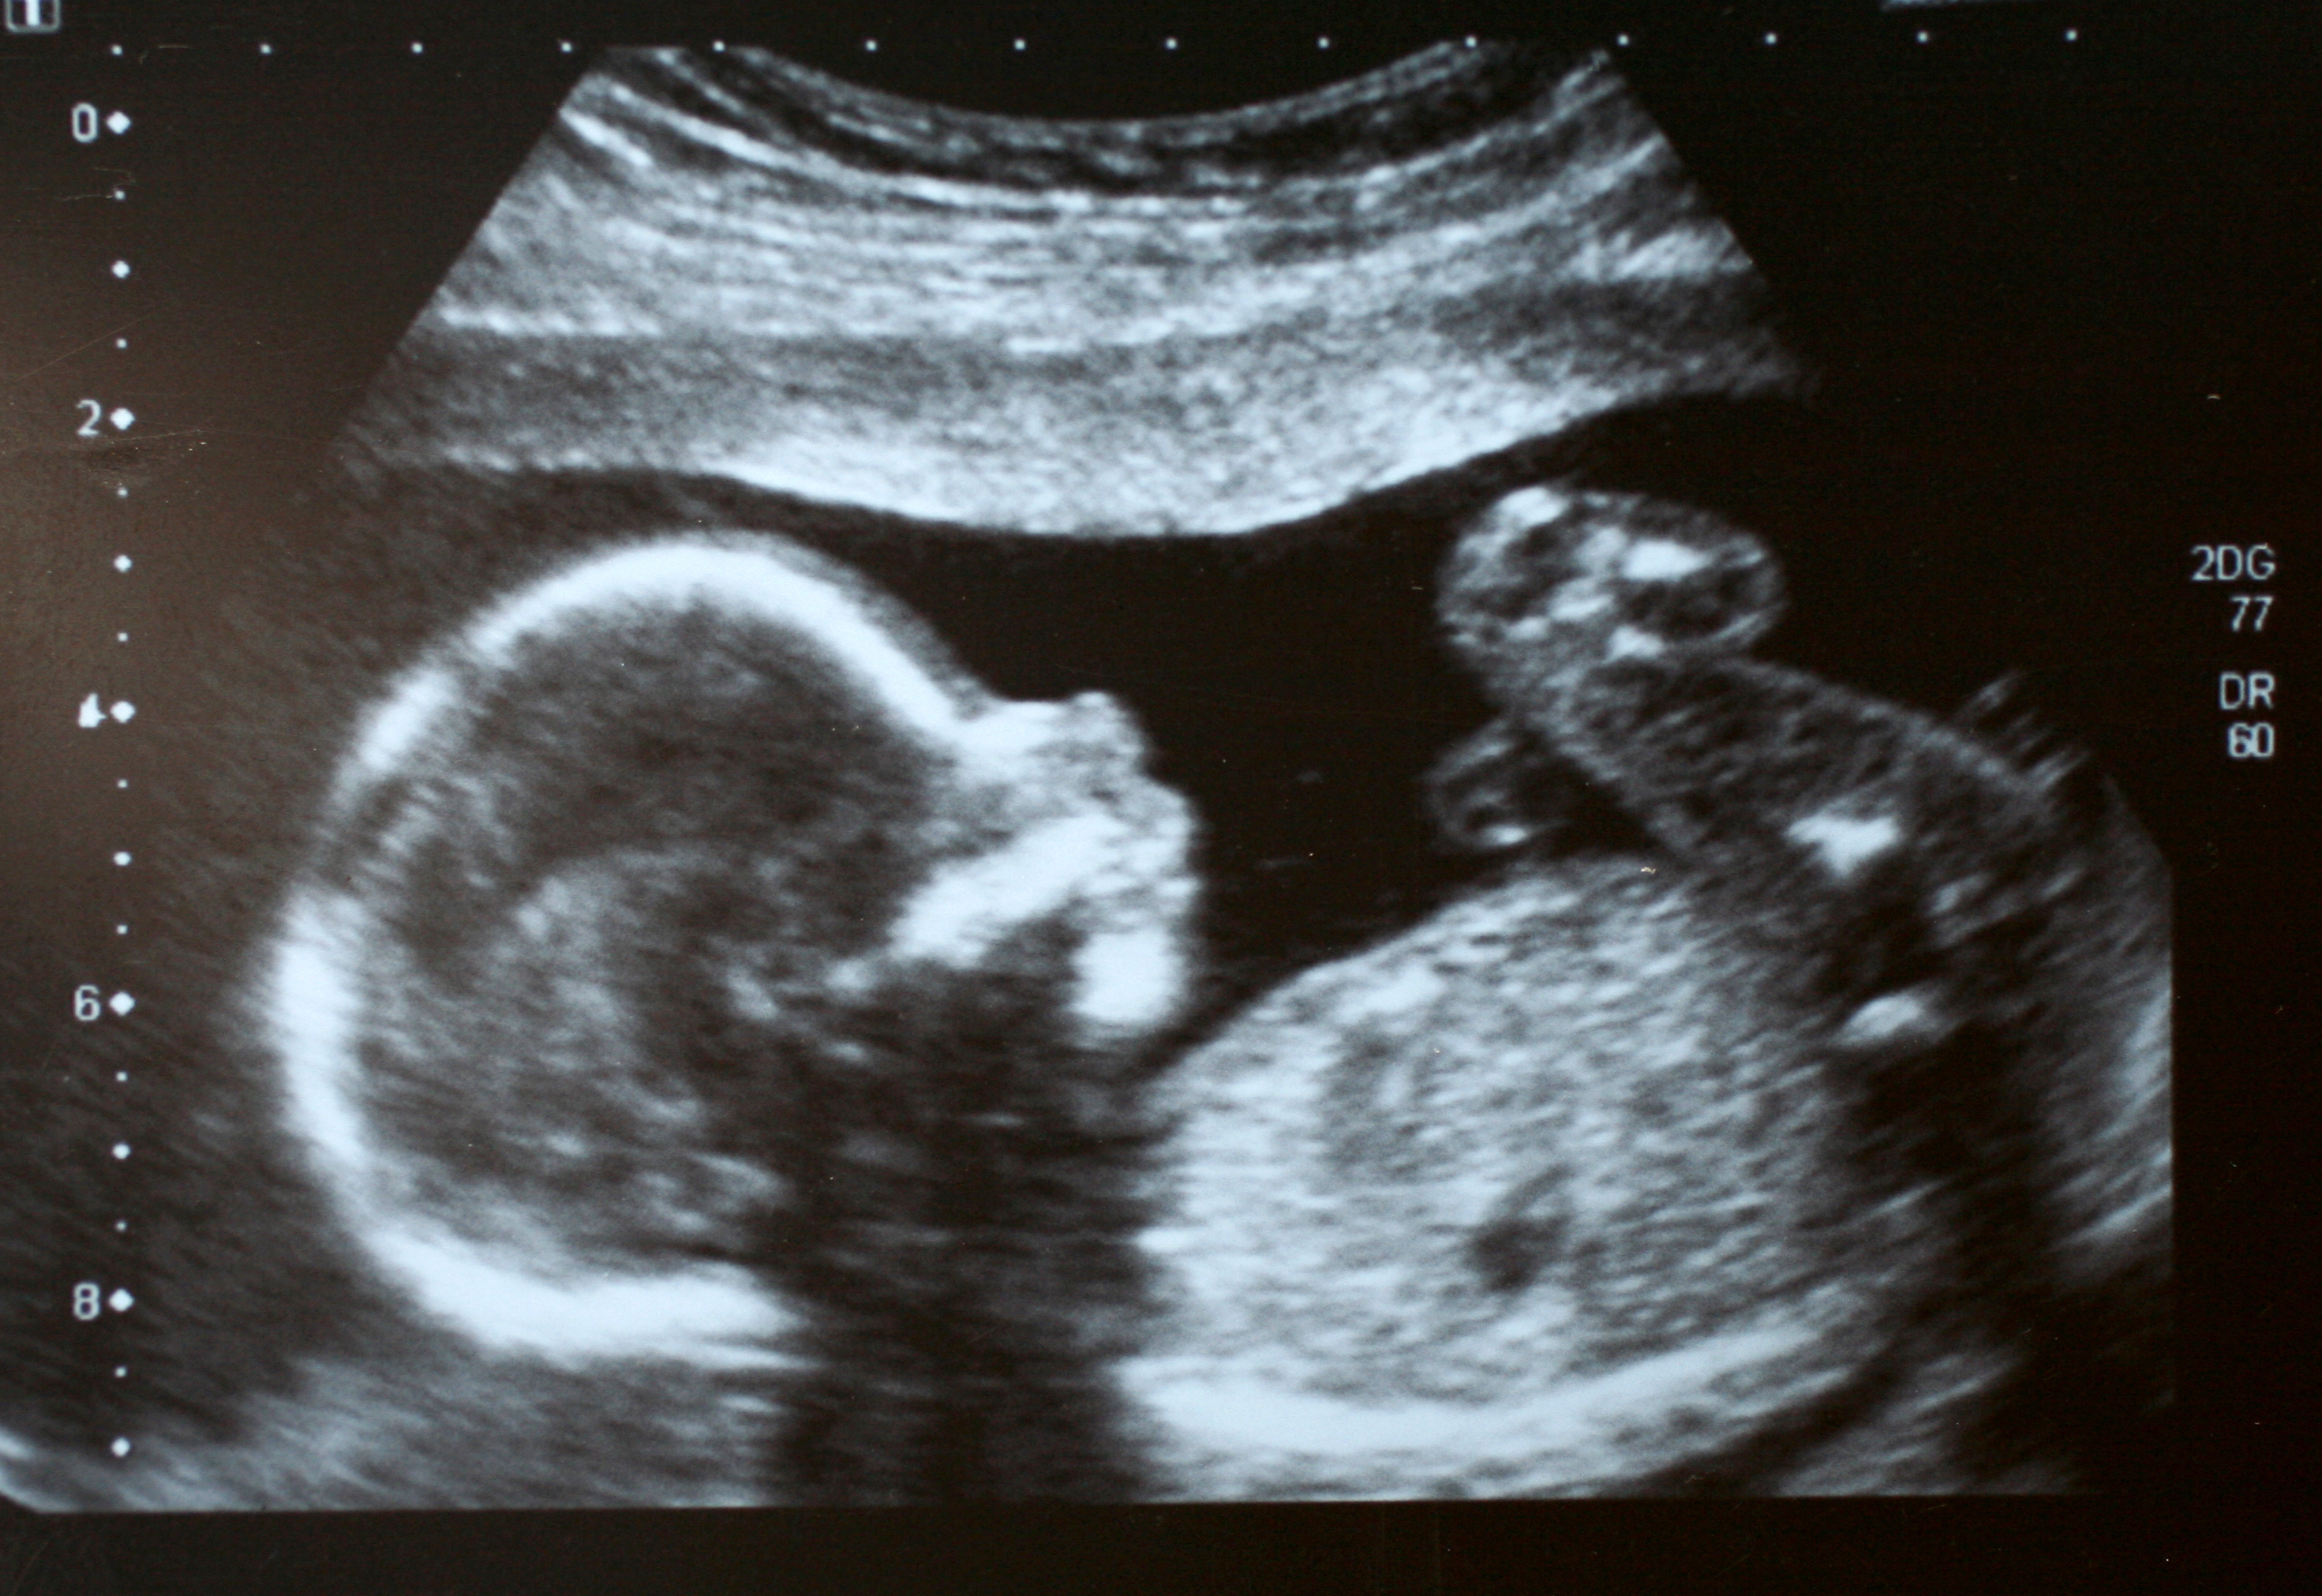 sonography image